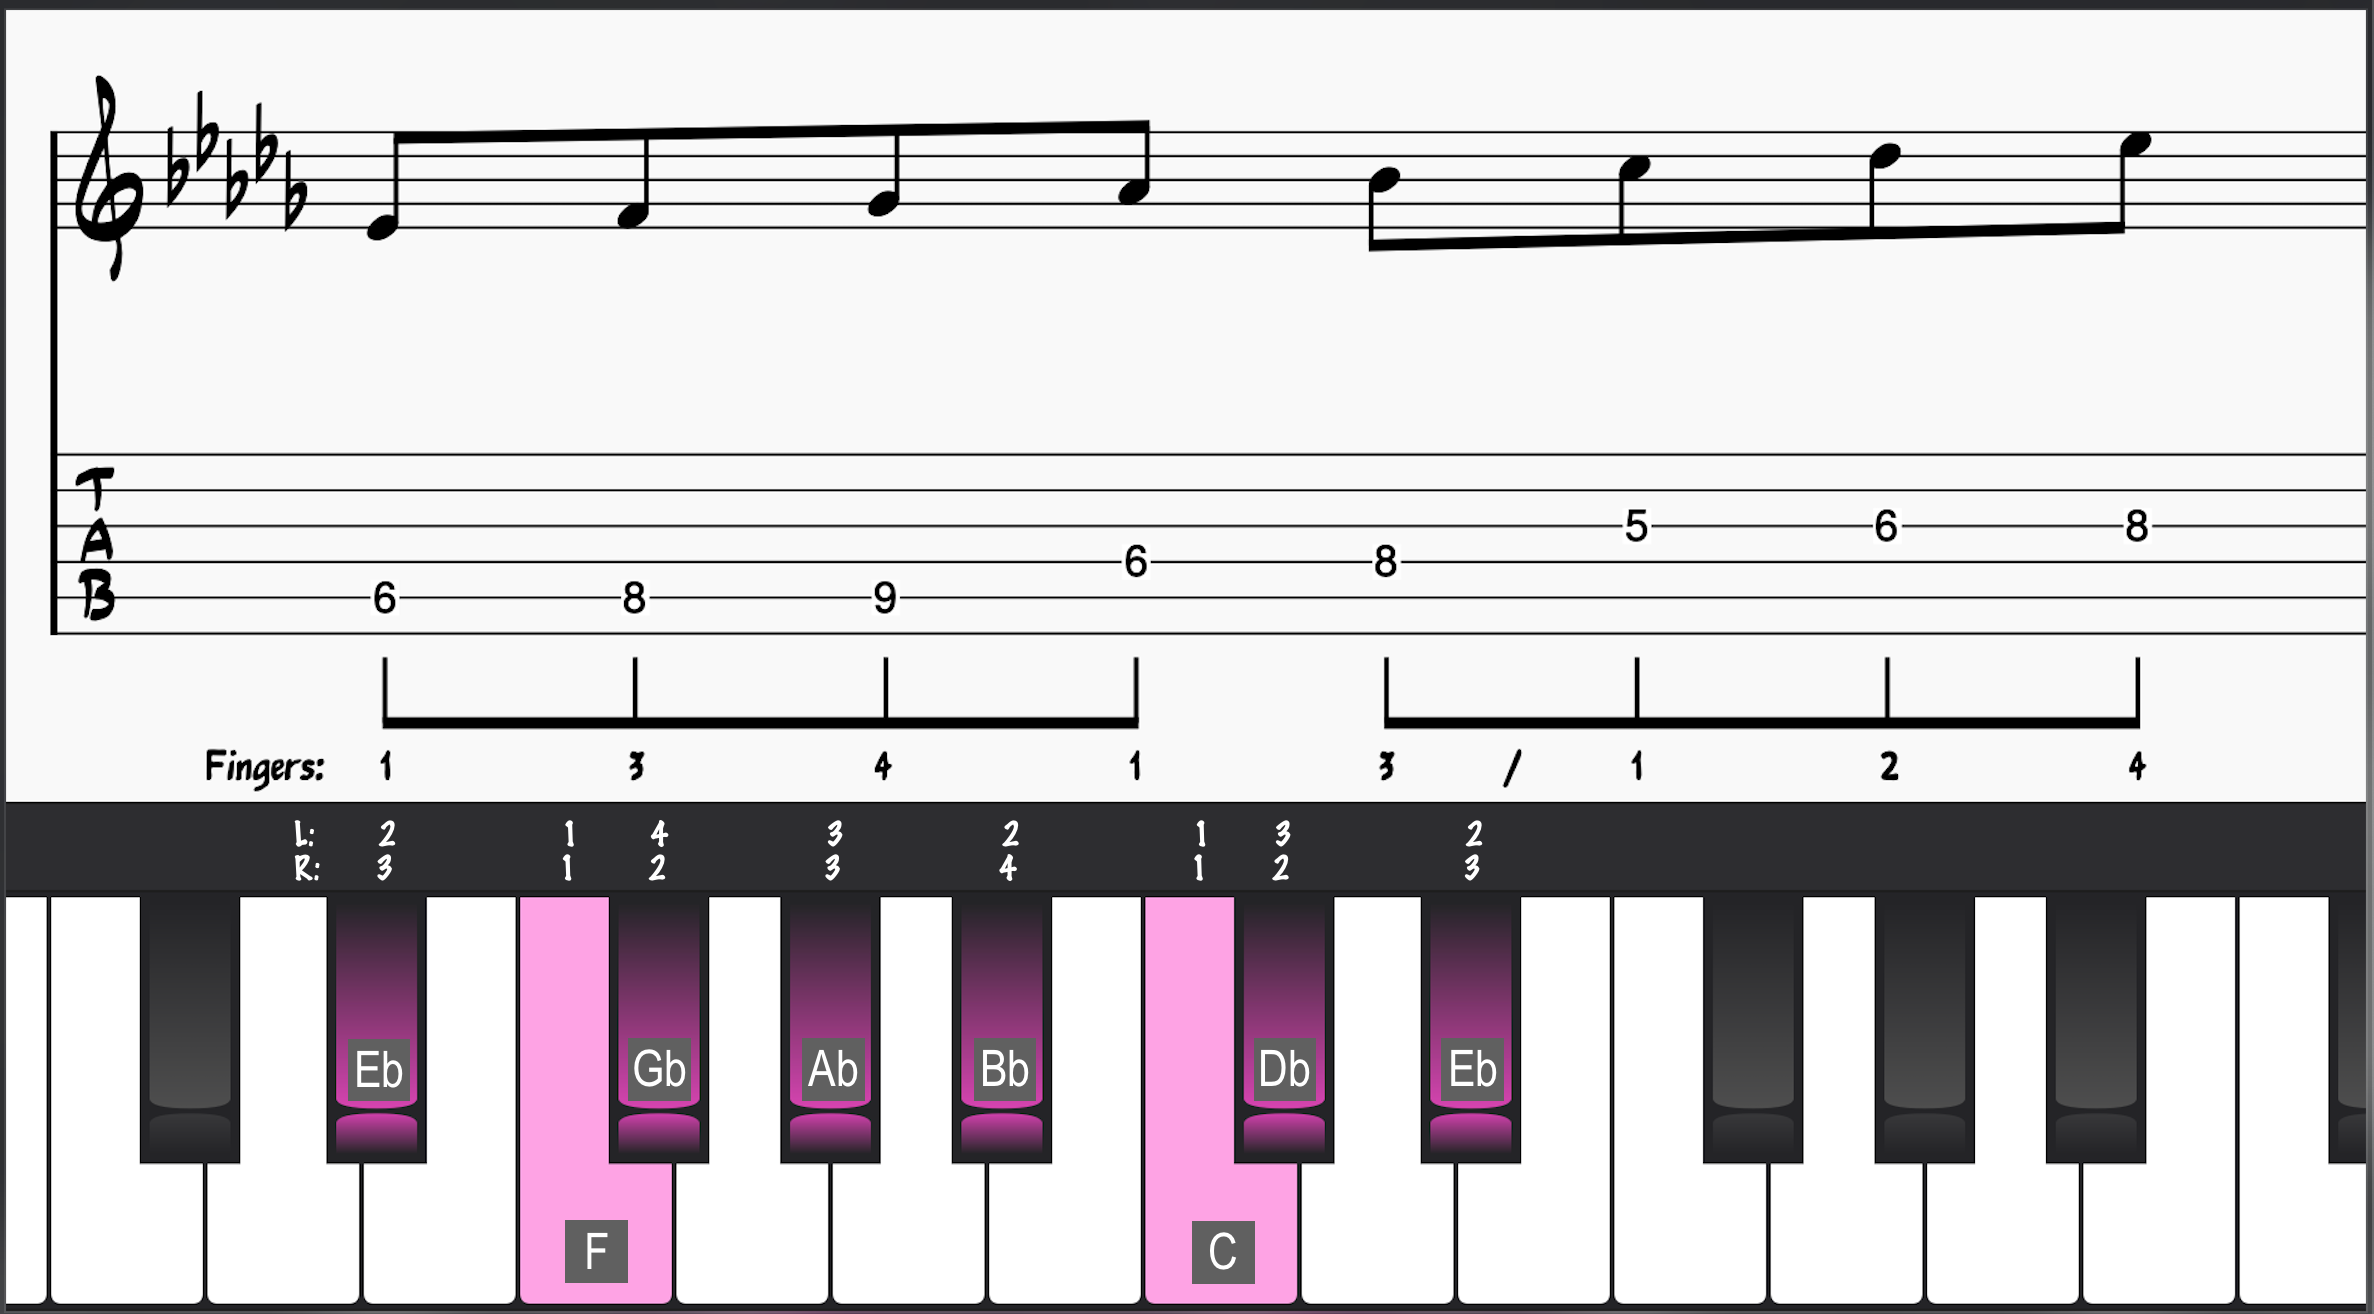 Eb Dorian Mode with Guitar and Piano Fingerings